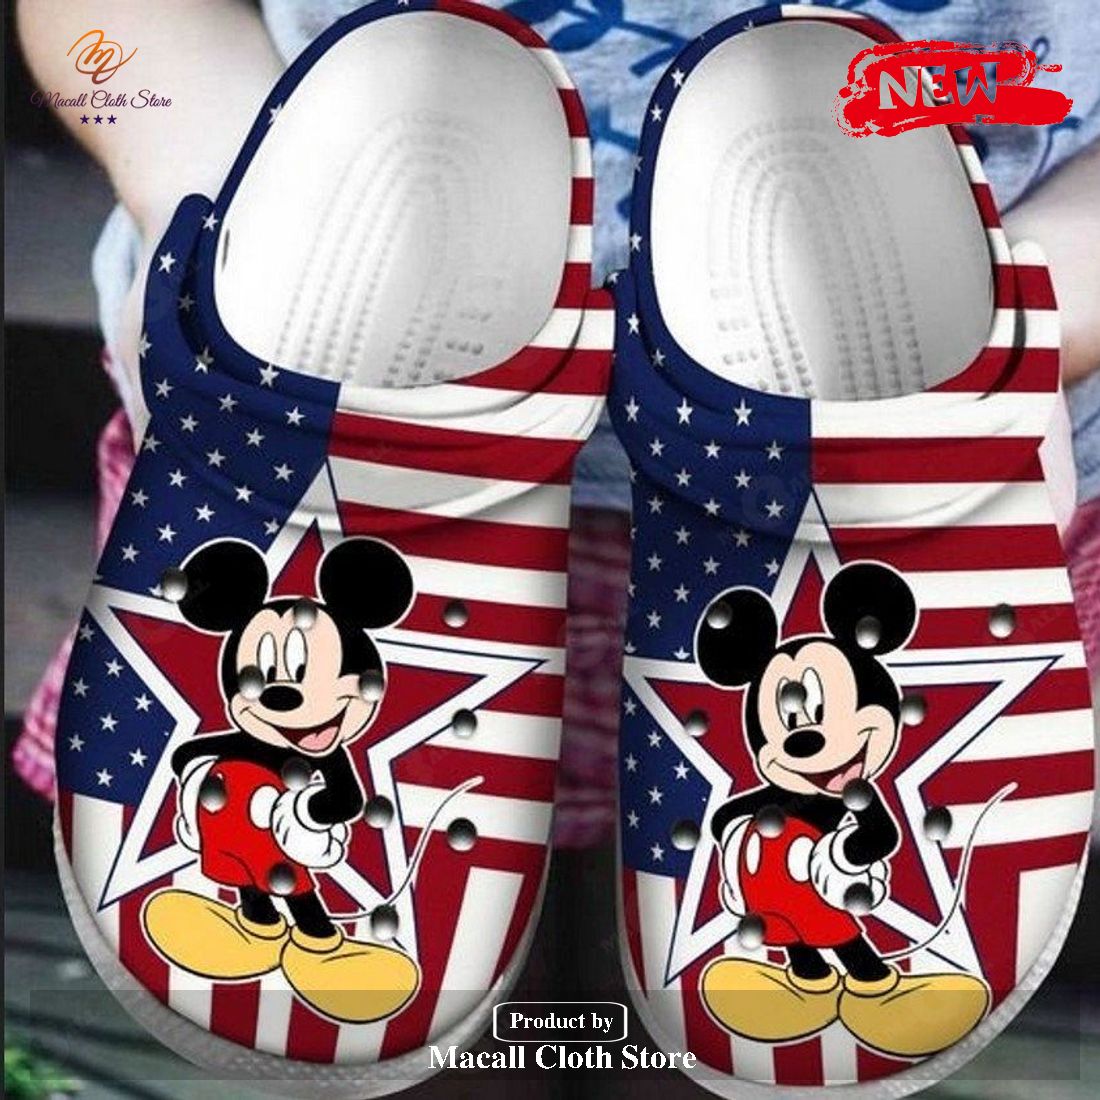 NEW] Mickey Mouse For Man and Women Crocs Clog Shoes - Macall Cloth Store -  Destination for fashionistas